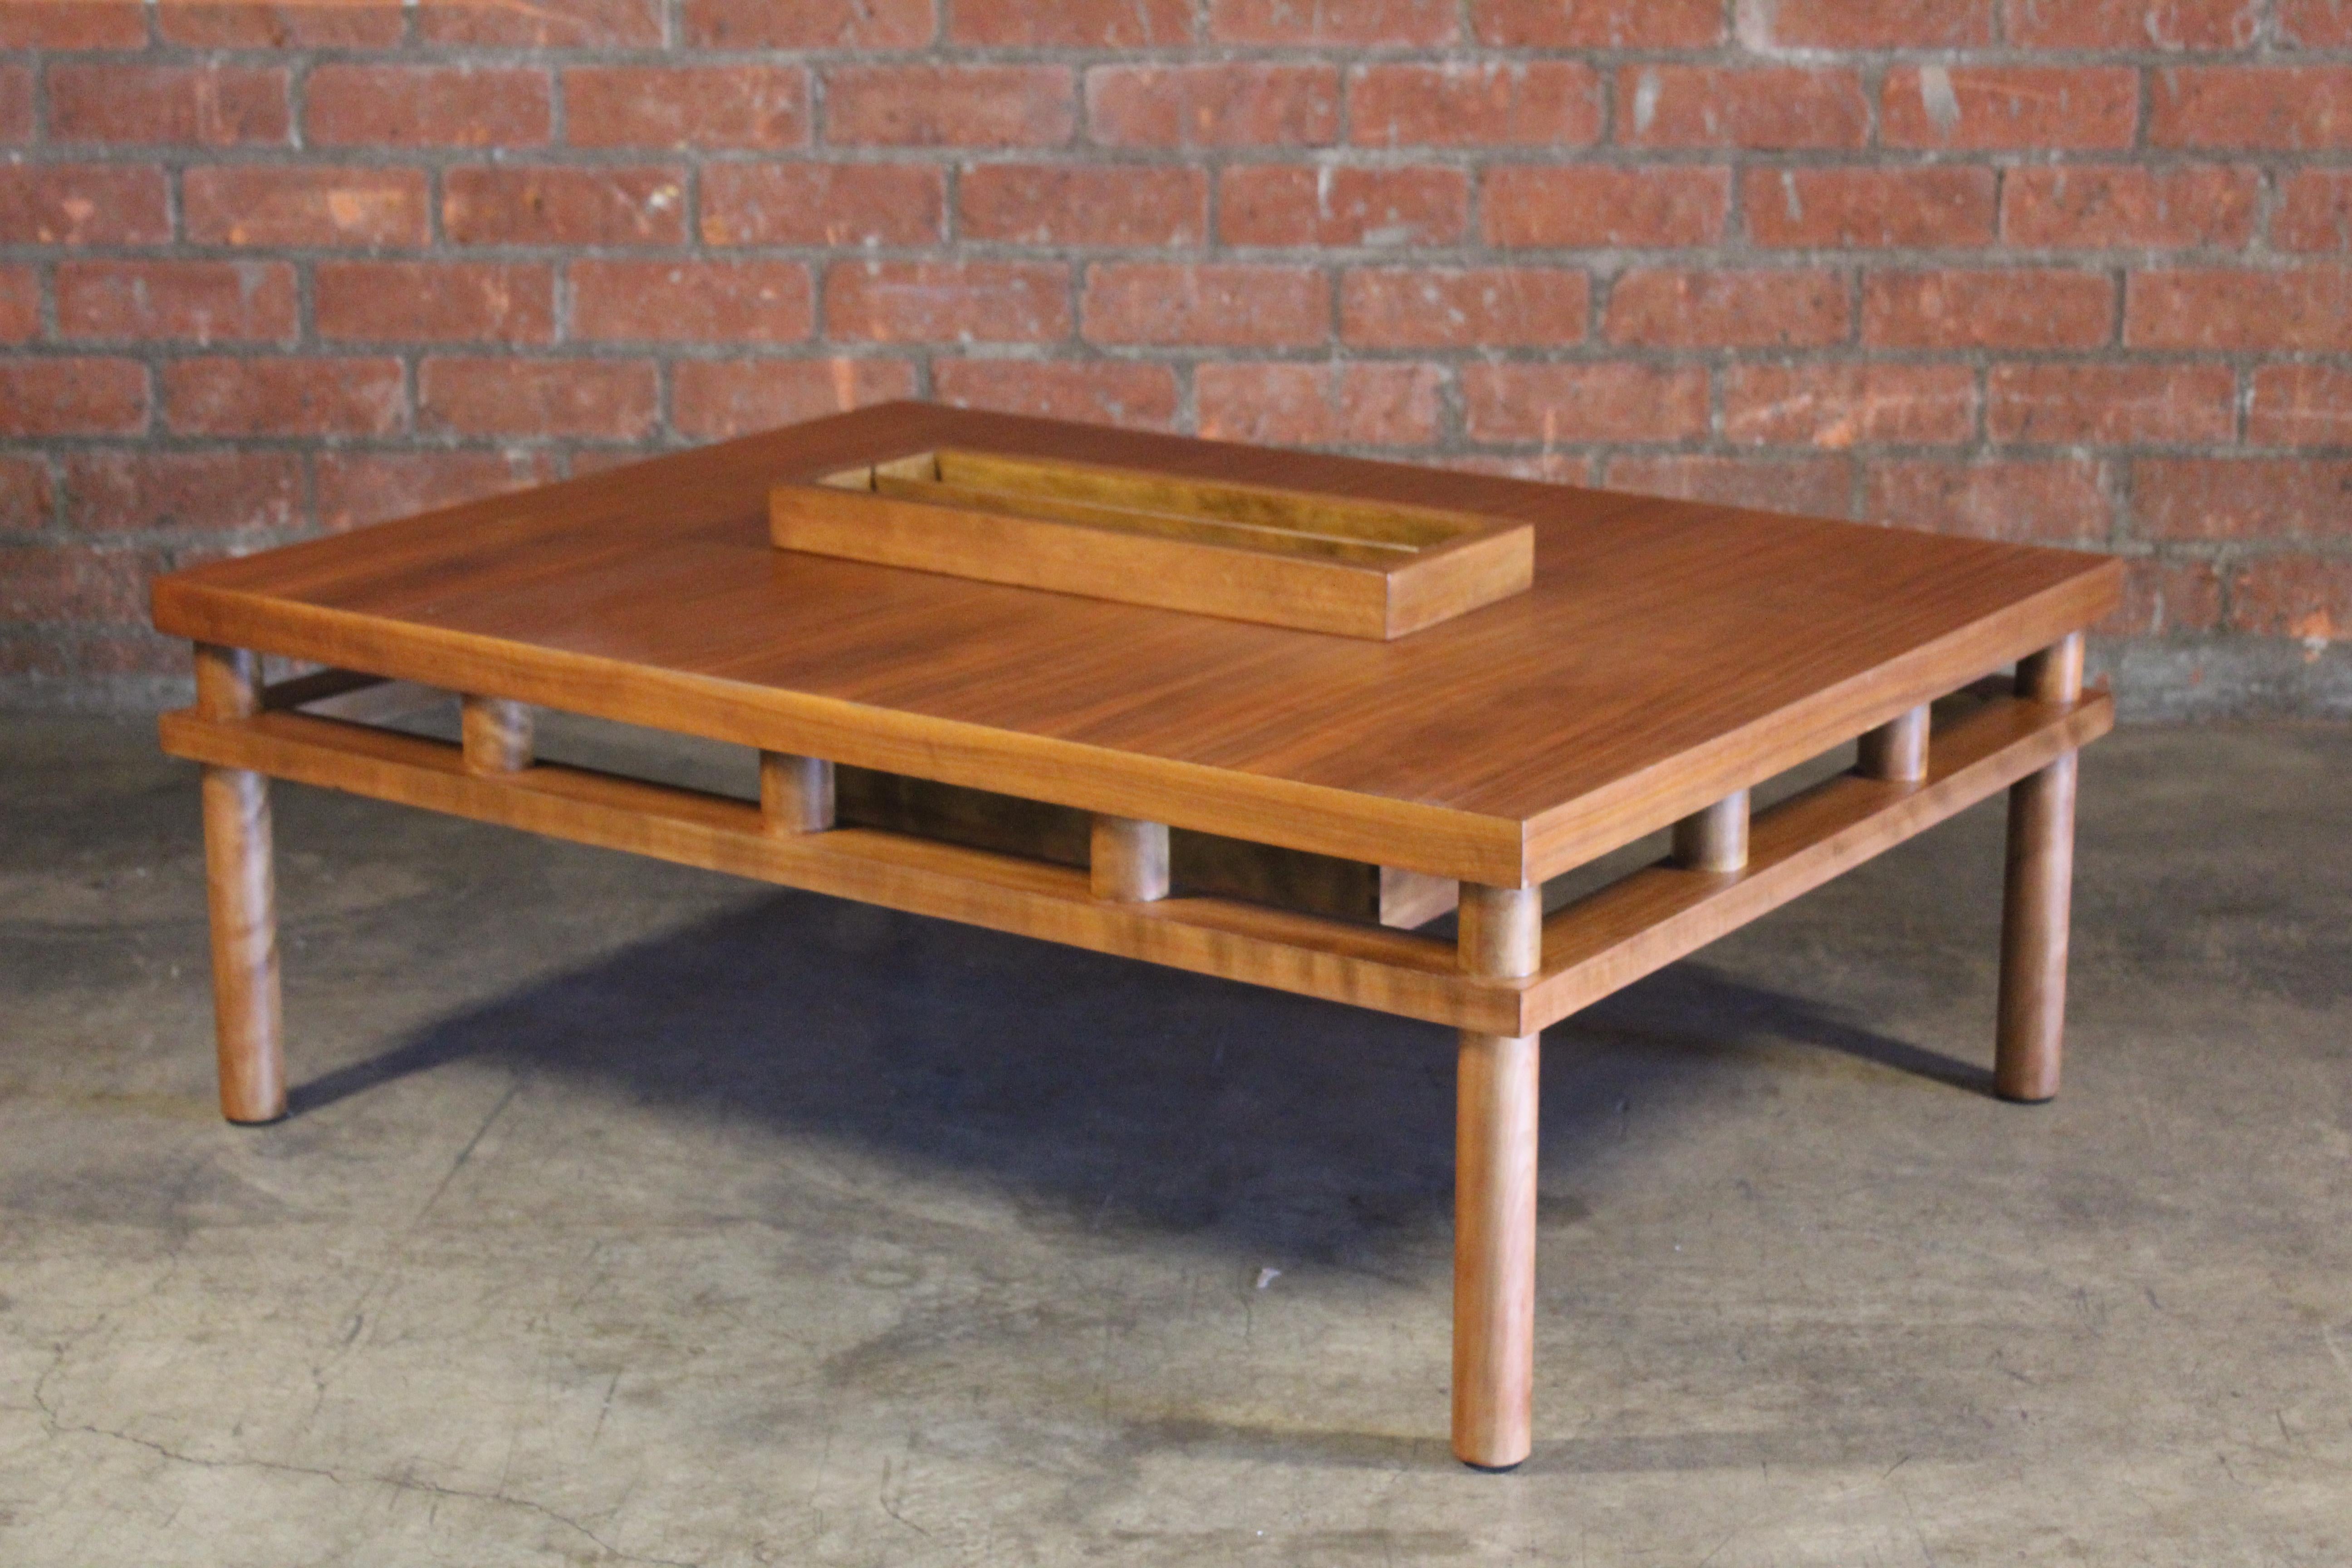 A vintage walnut coffee table with magazine storage designed by T.H Robsjohn-Gibbings, for Widdicomb, 1950s. In excellent newly refinished condition.